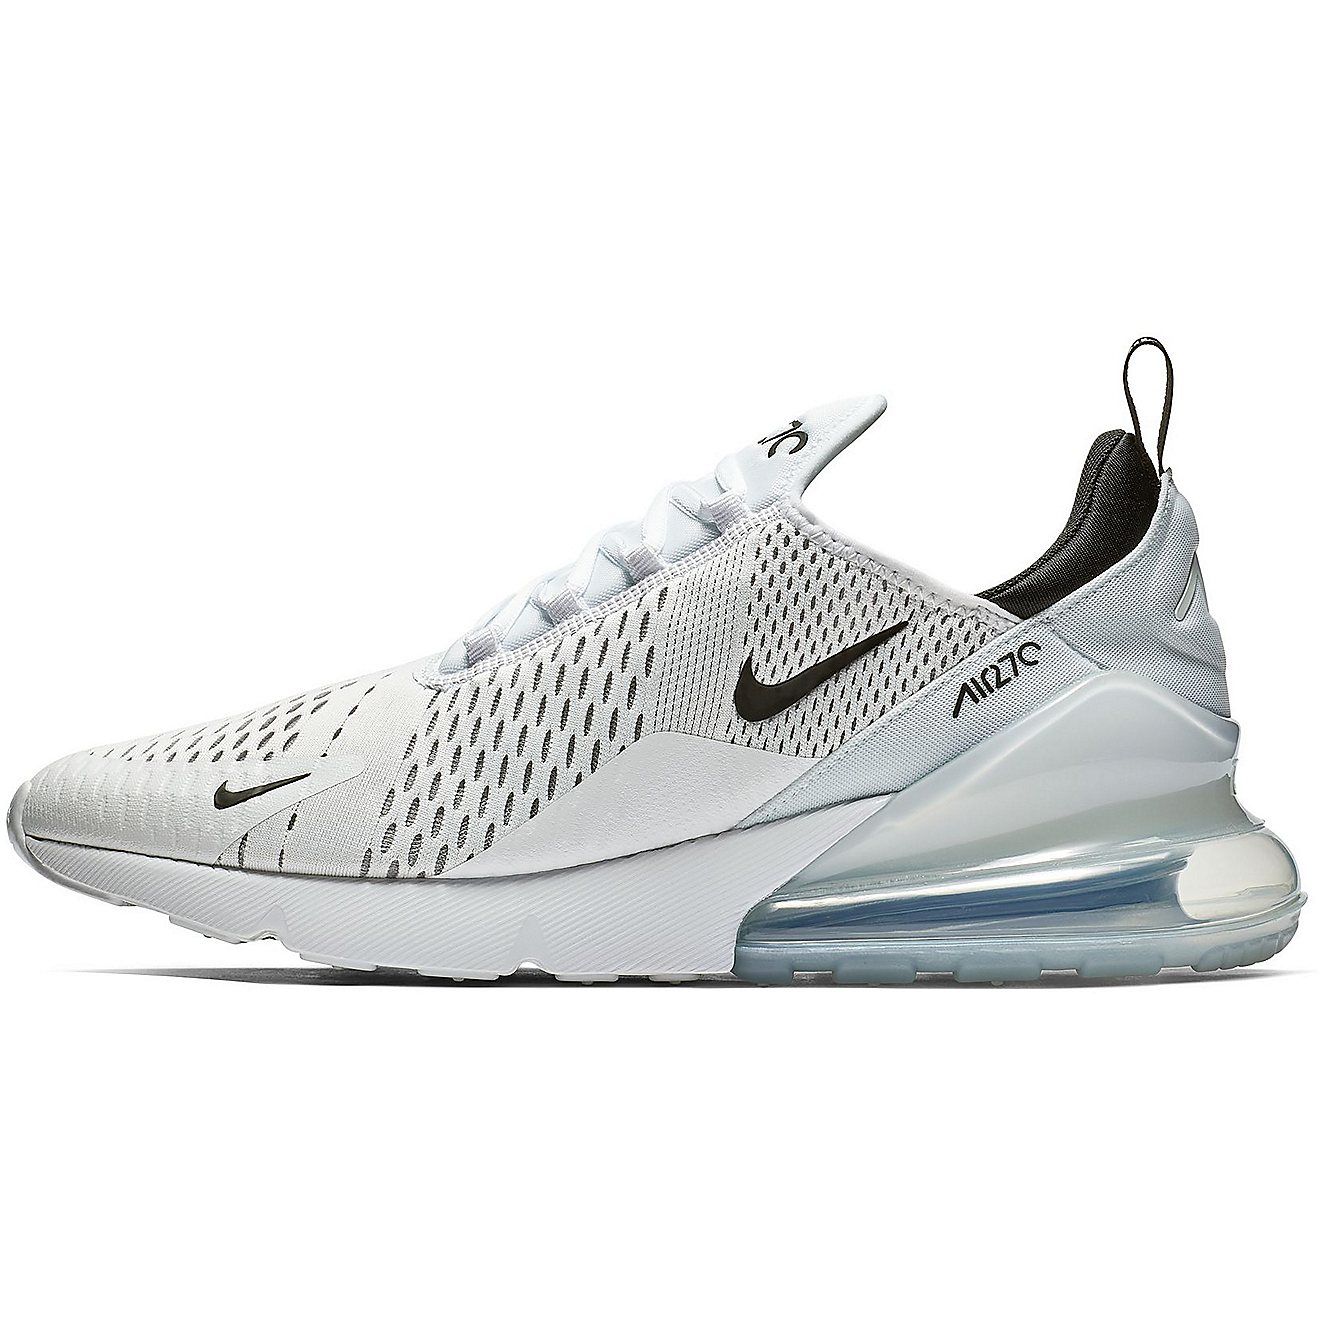 Nike Men’s Air Max 270 Shoes | Free Shipping at Academy | Academy Sports + Outdoors